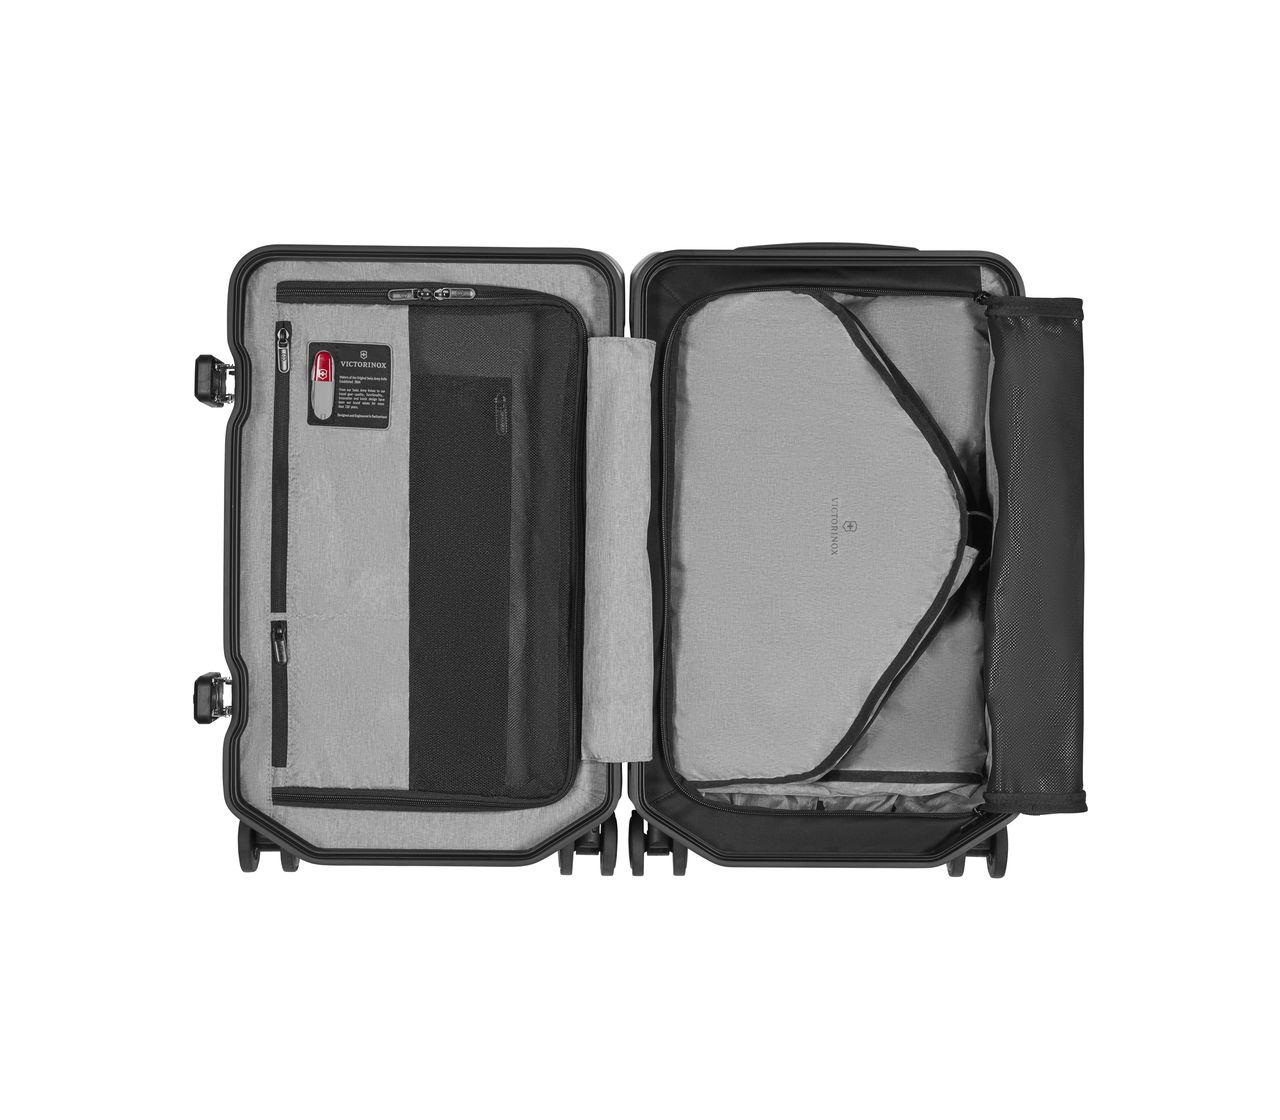 Lexicon Framed Series Frequent Flyer Hardside Carry-On -610538